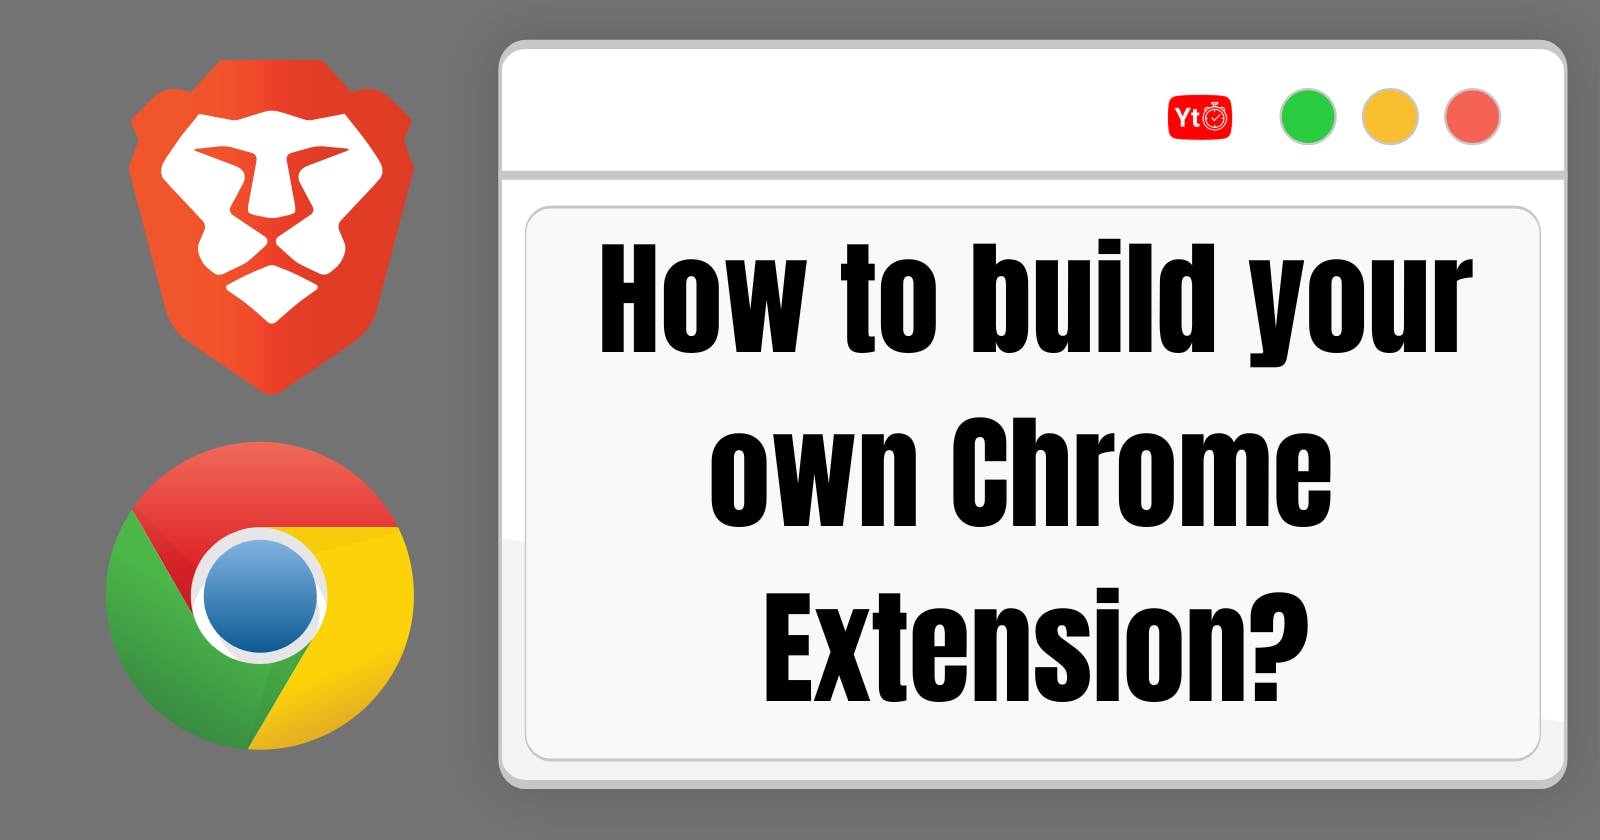 How to build your own Google Chrome extension?